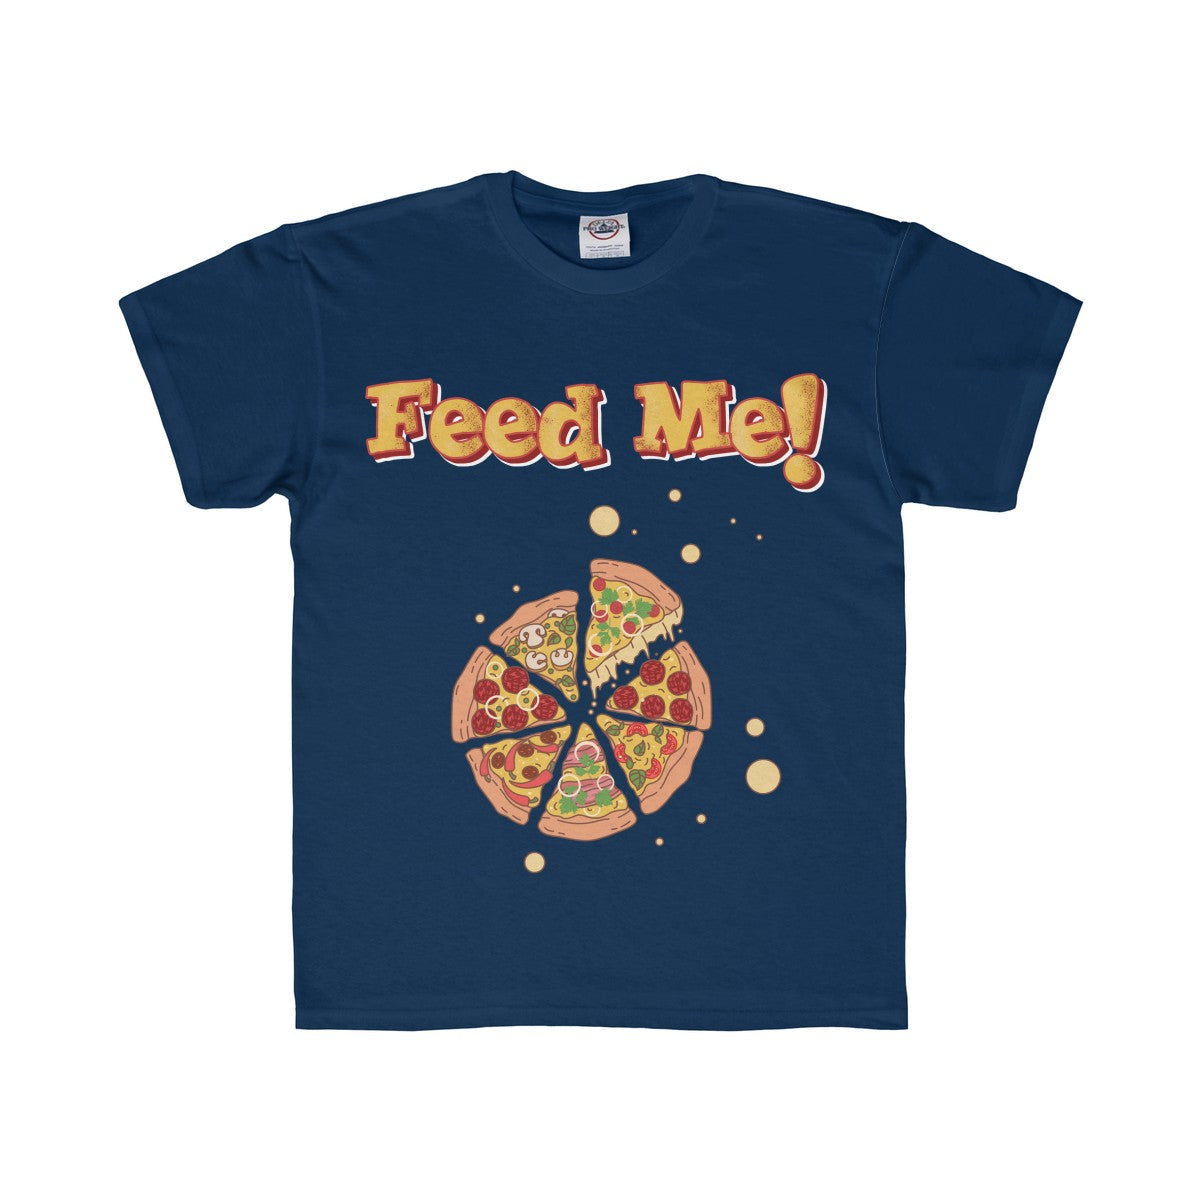 Feed Me Pizza Youth Regular Fit Tee-Kids clothes-PureDesignTees